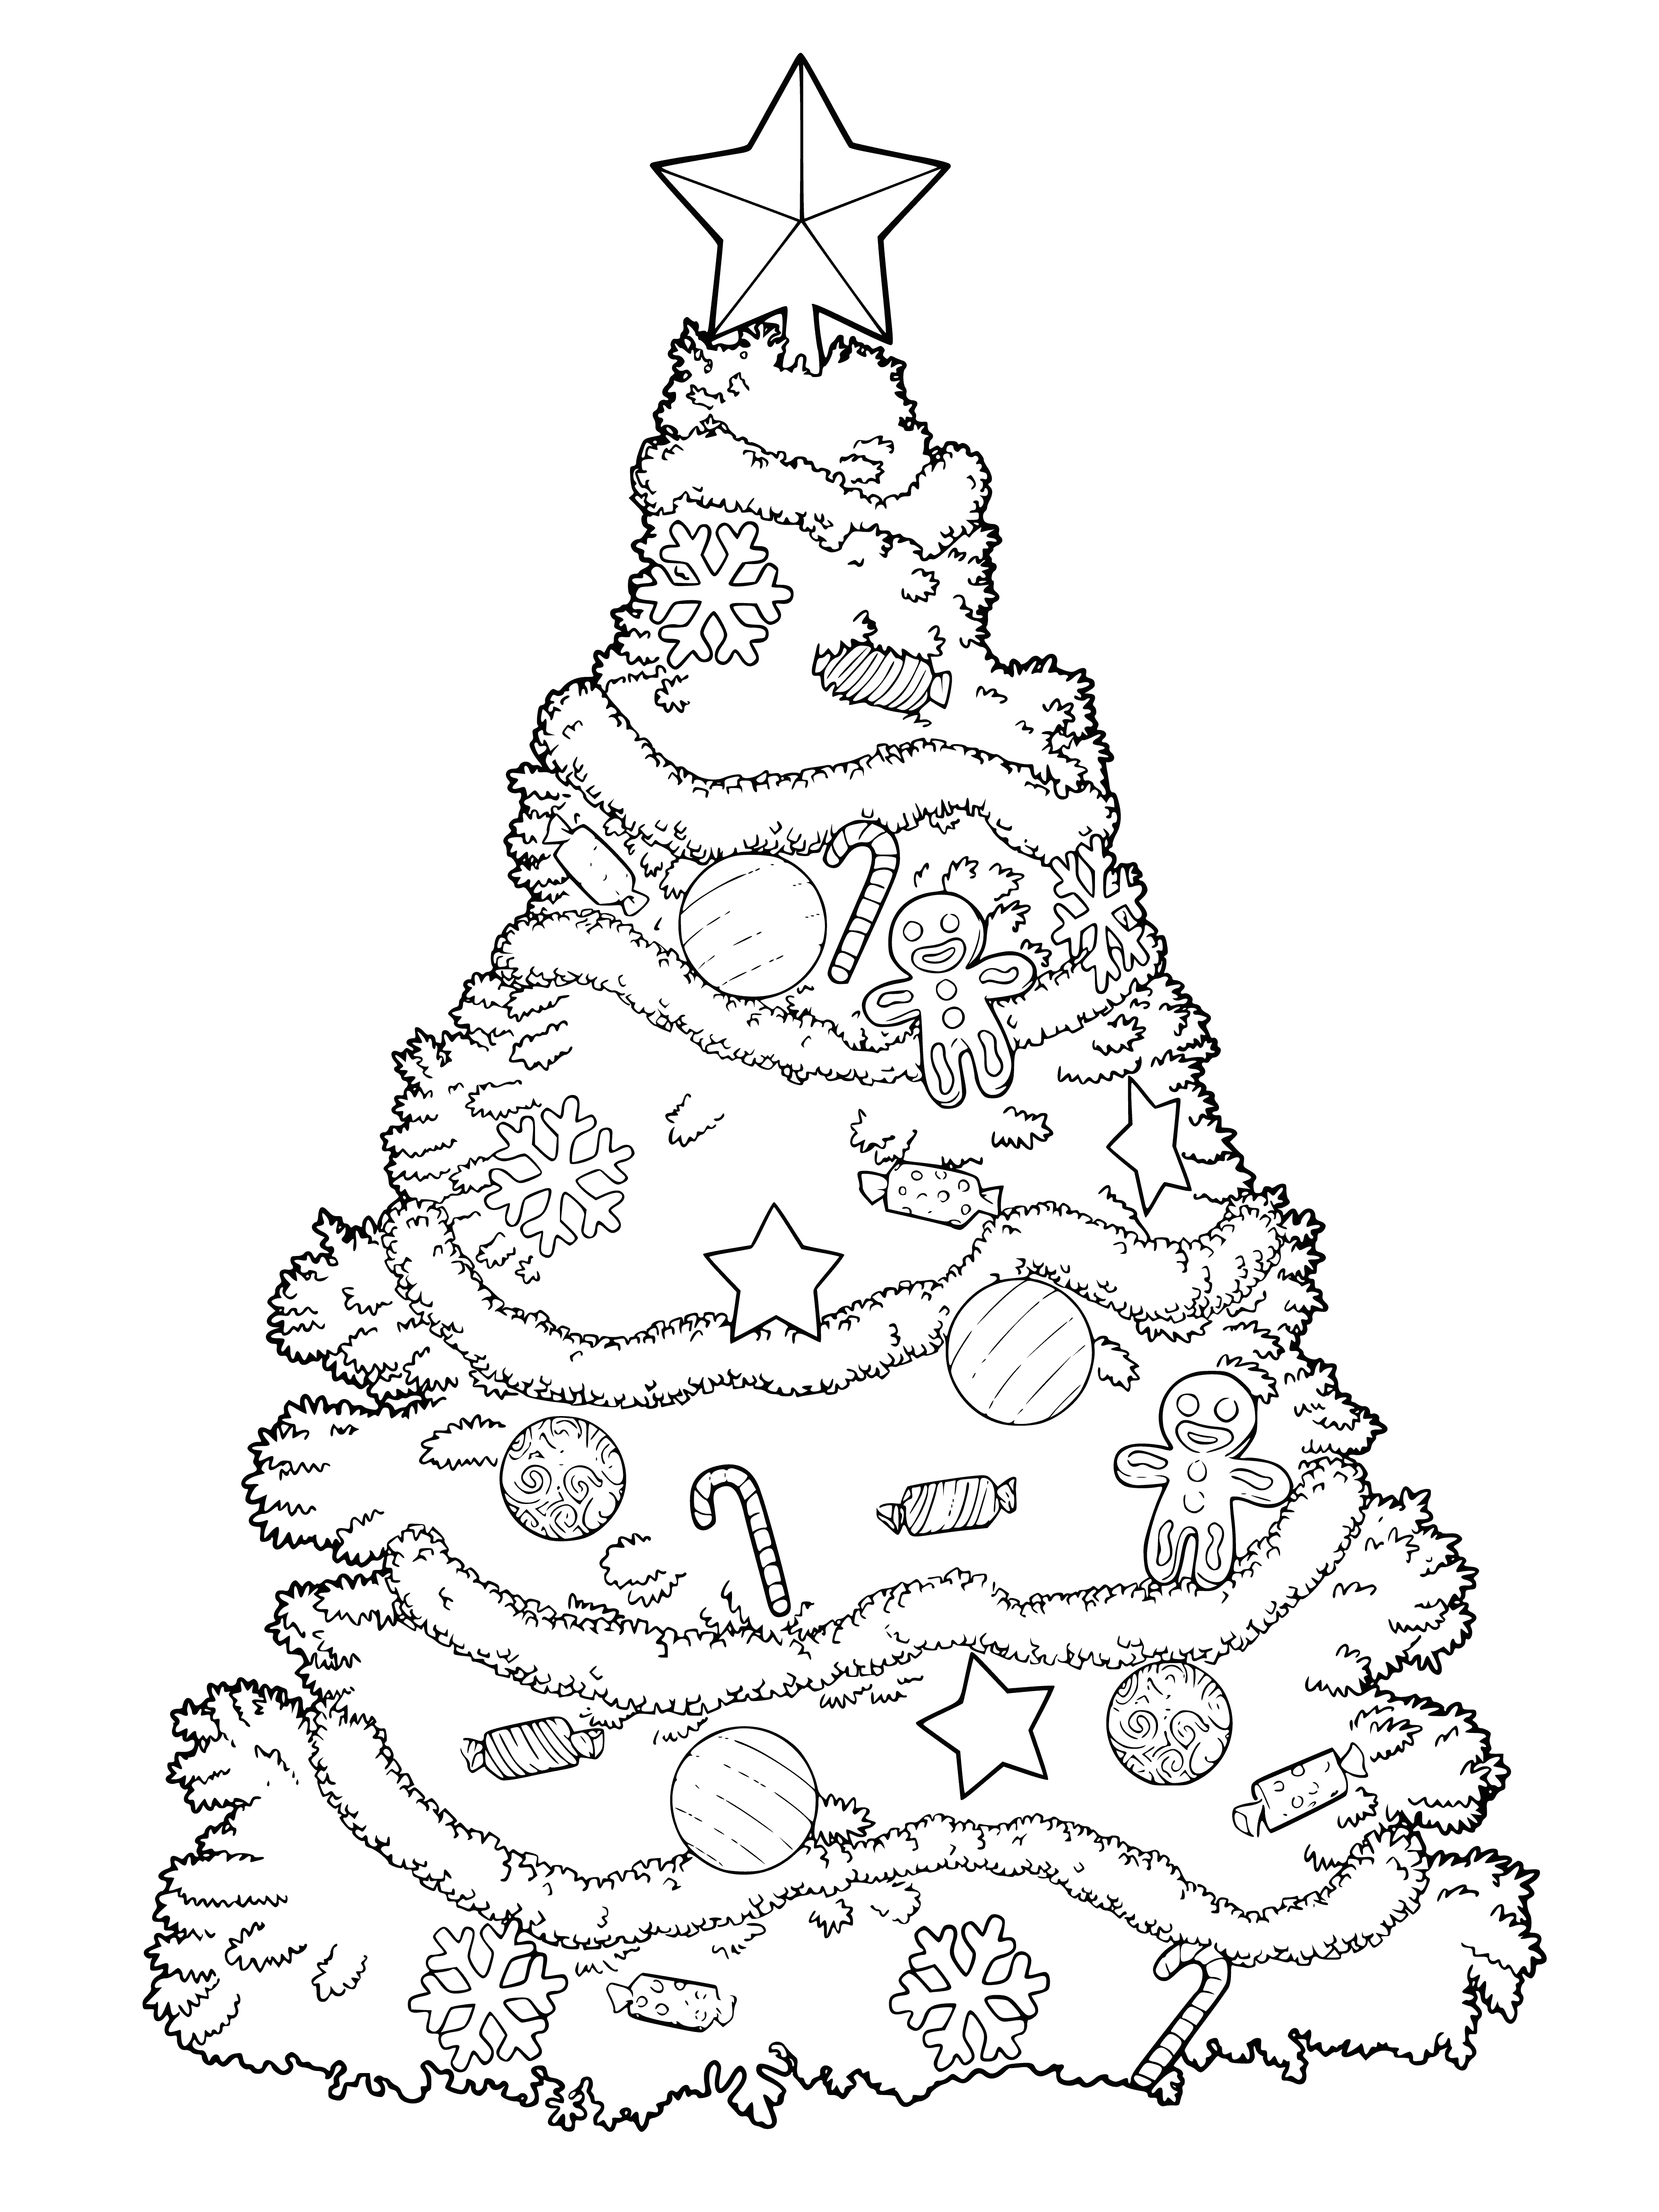 coloring page: Decorated Christmas tree with presents & lights to color! Star on top & balls/ribbons to make it festive!